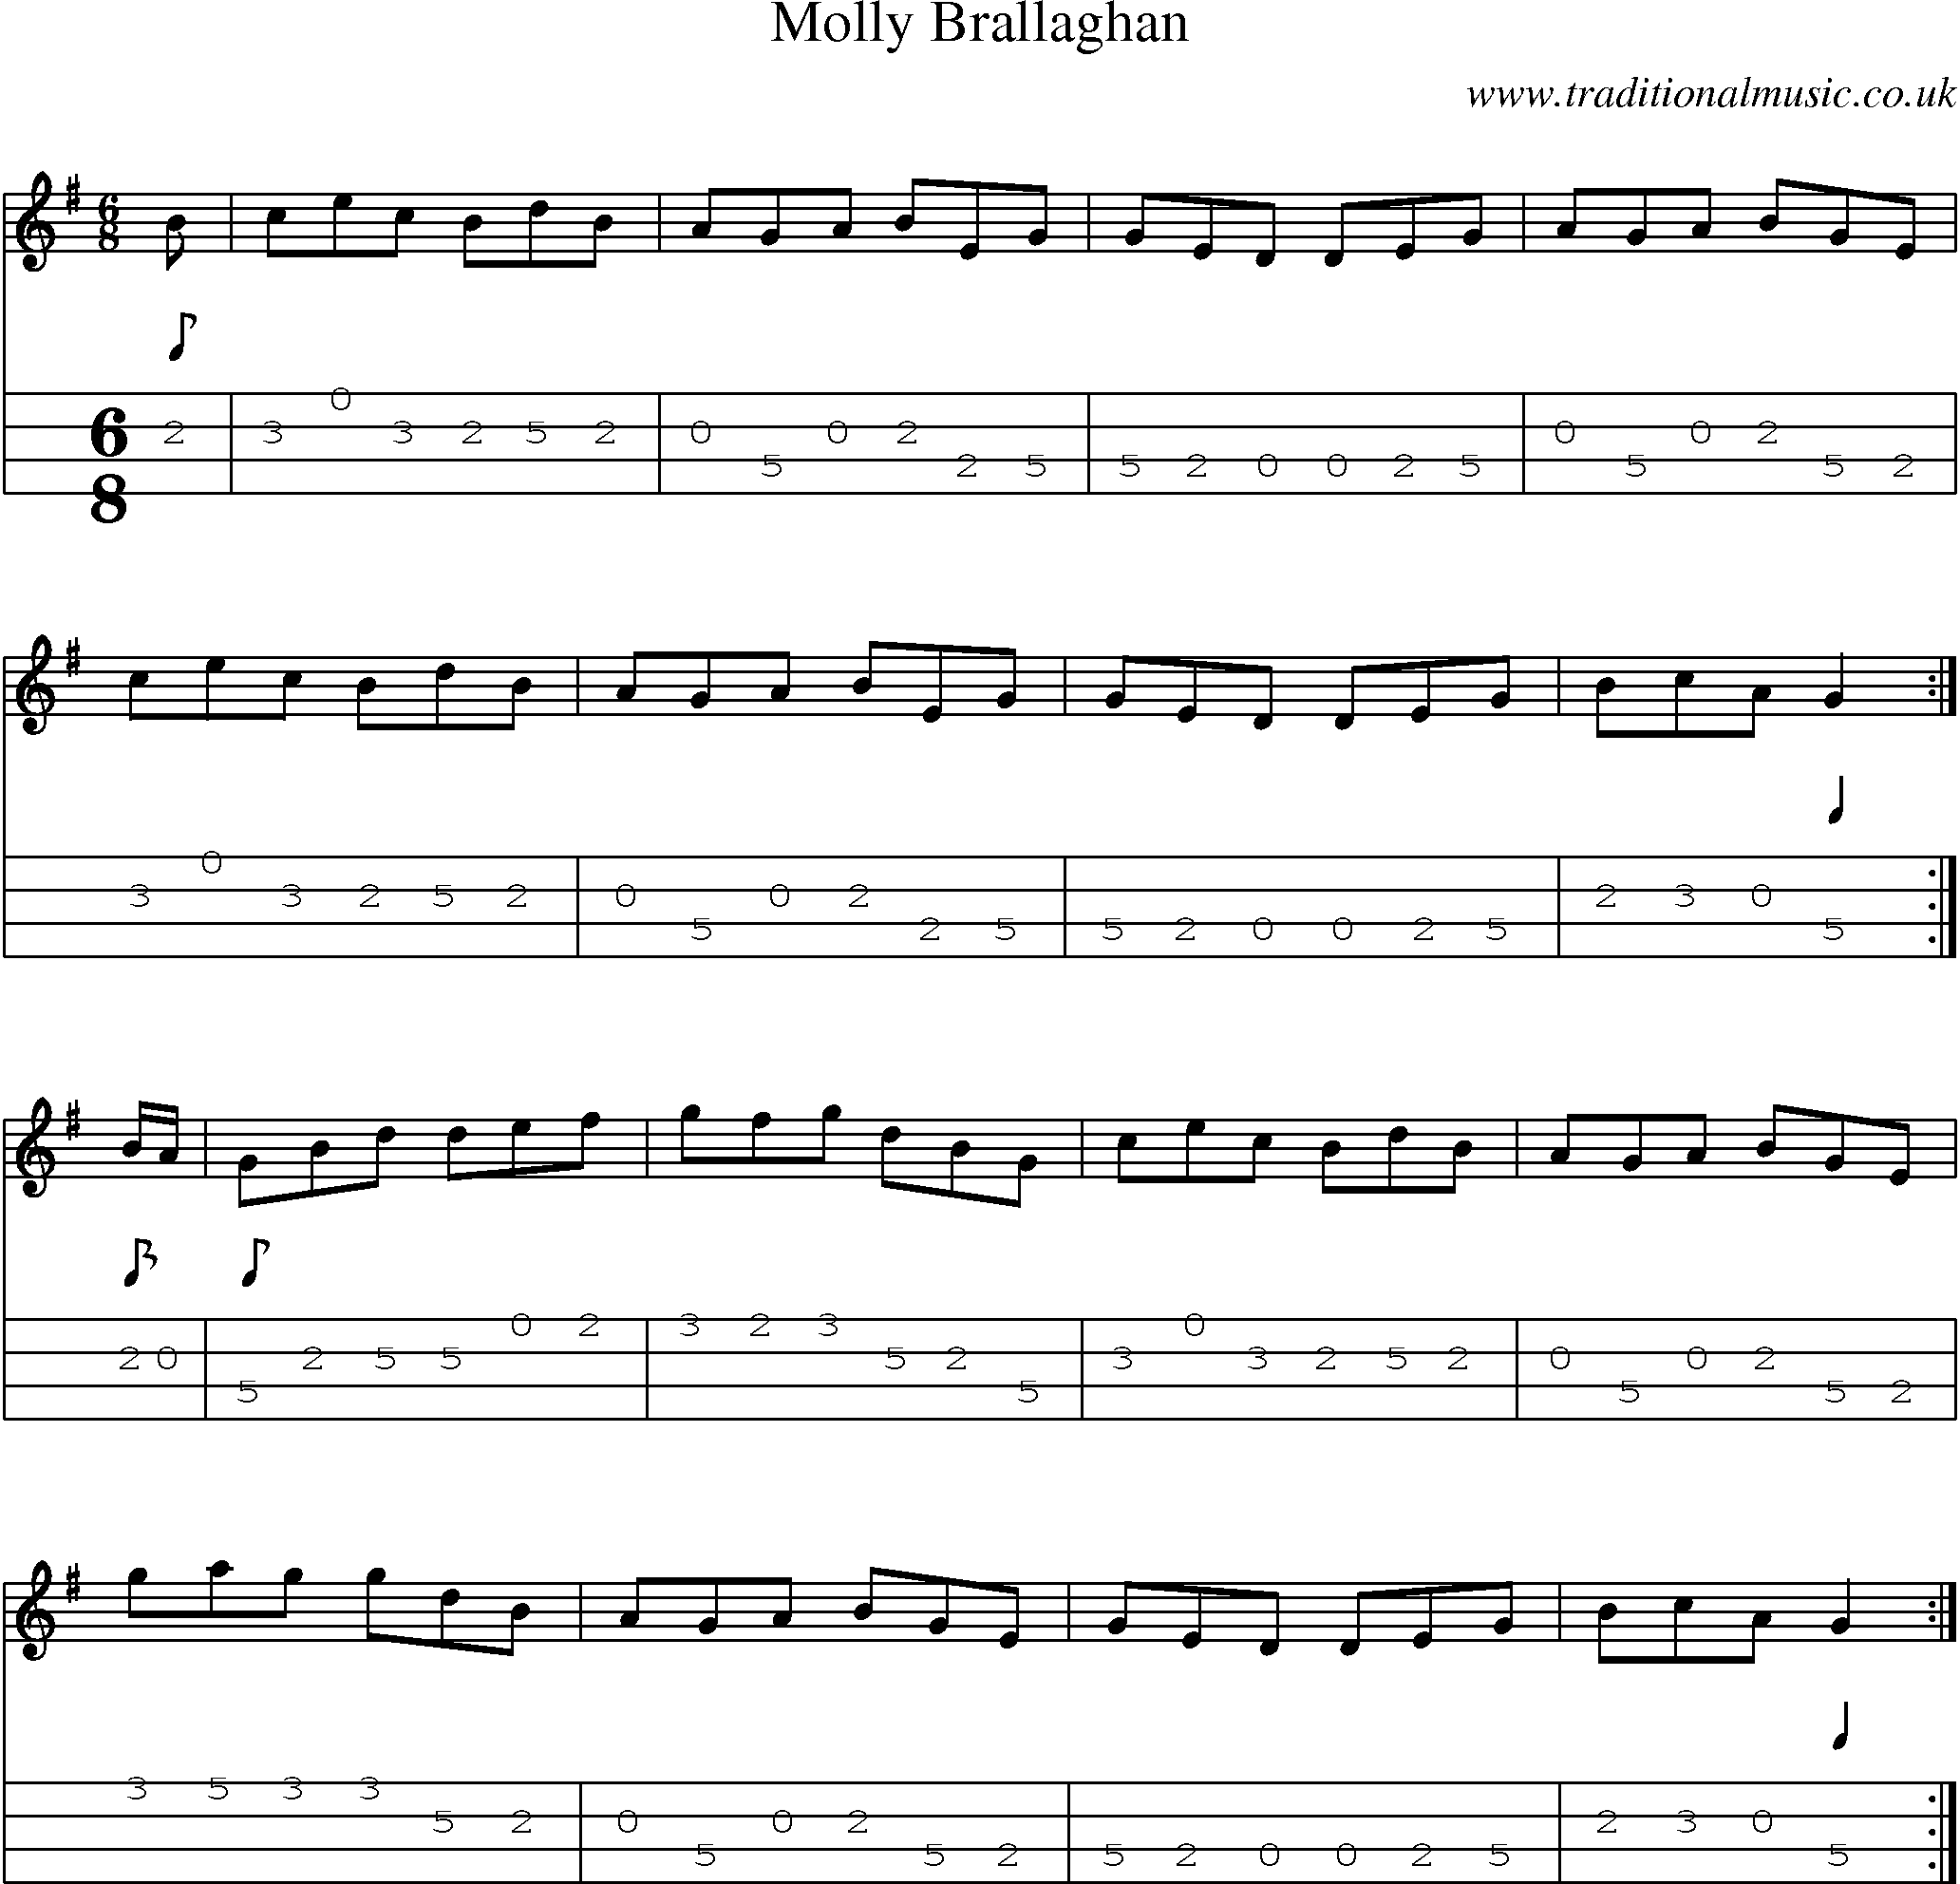 Music Score and Mandolin Tabs for Molly Brallaghan